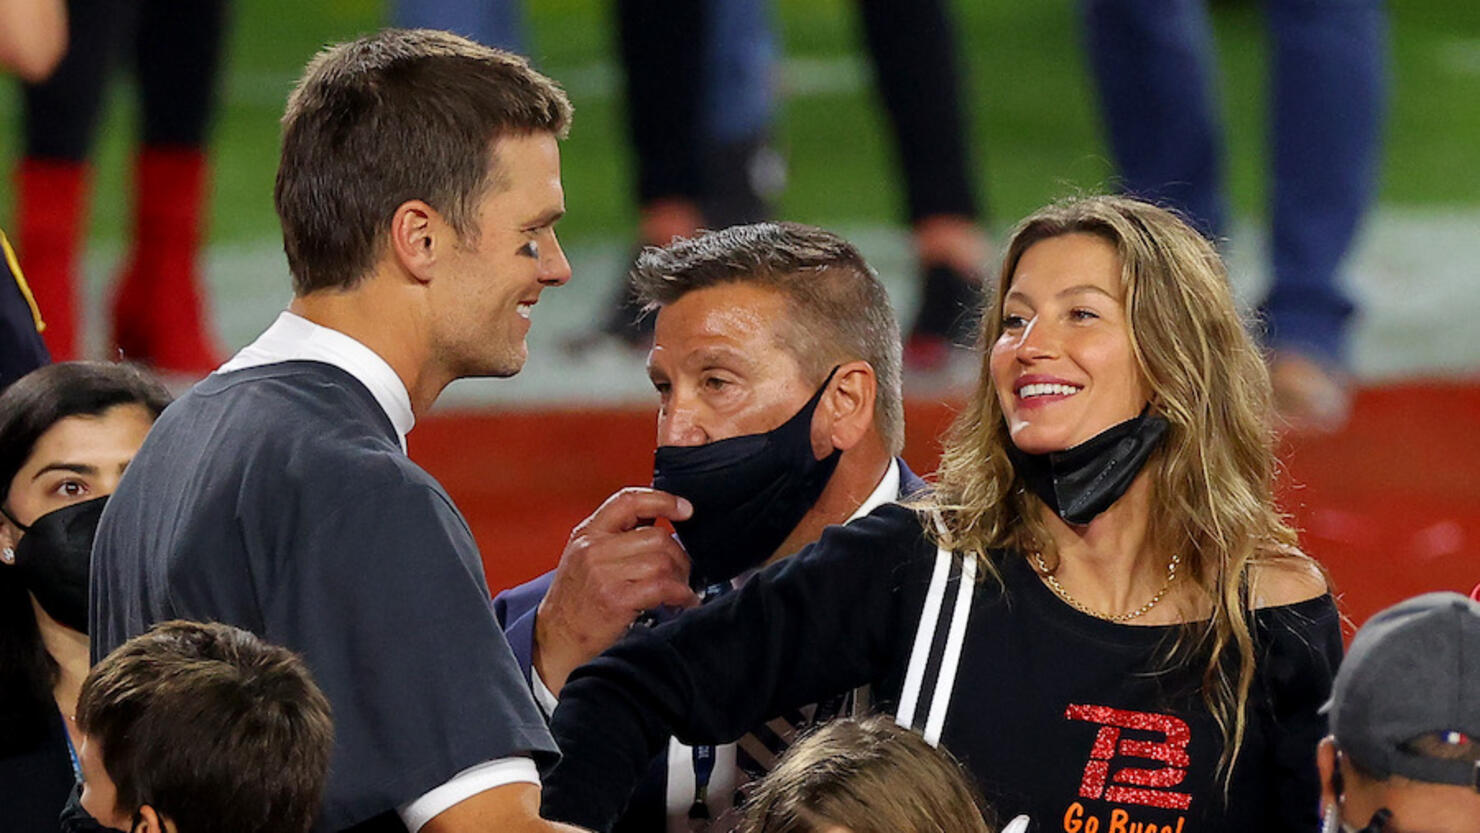 gisele at bucs game today